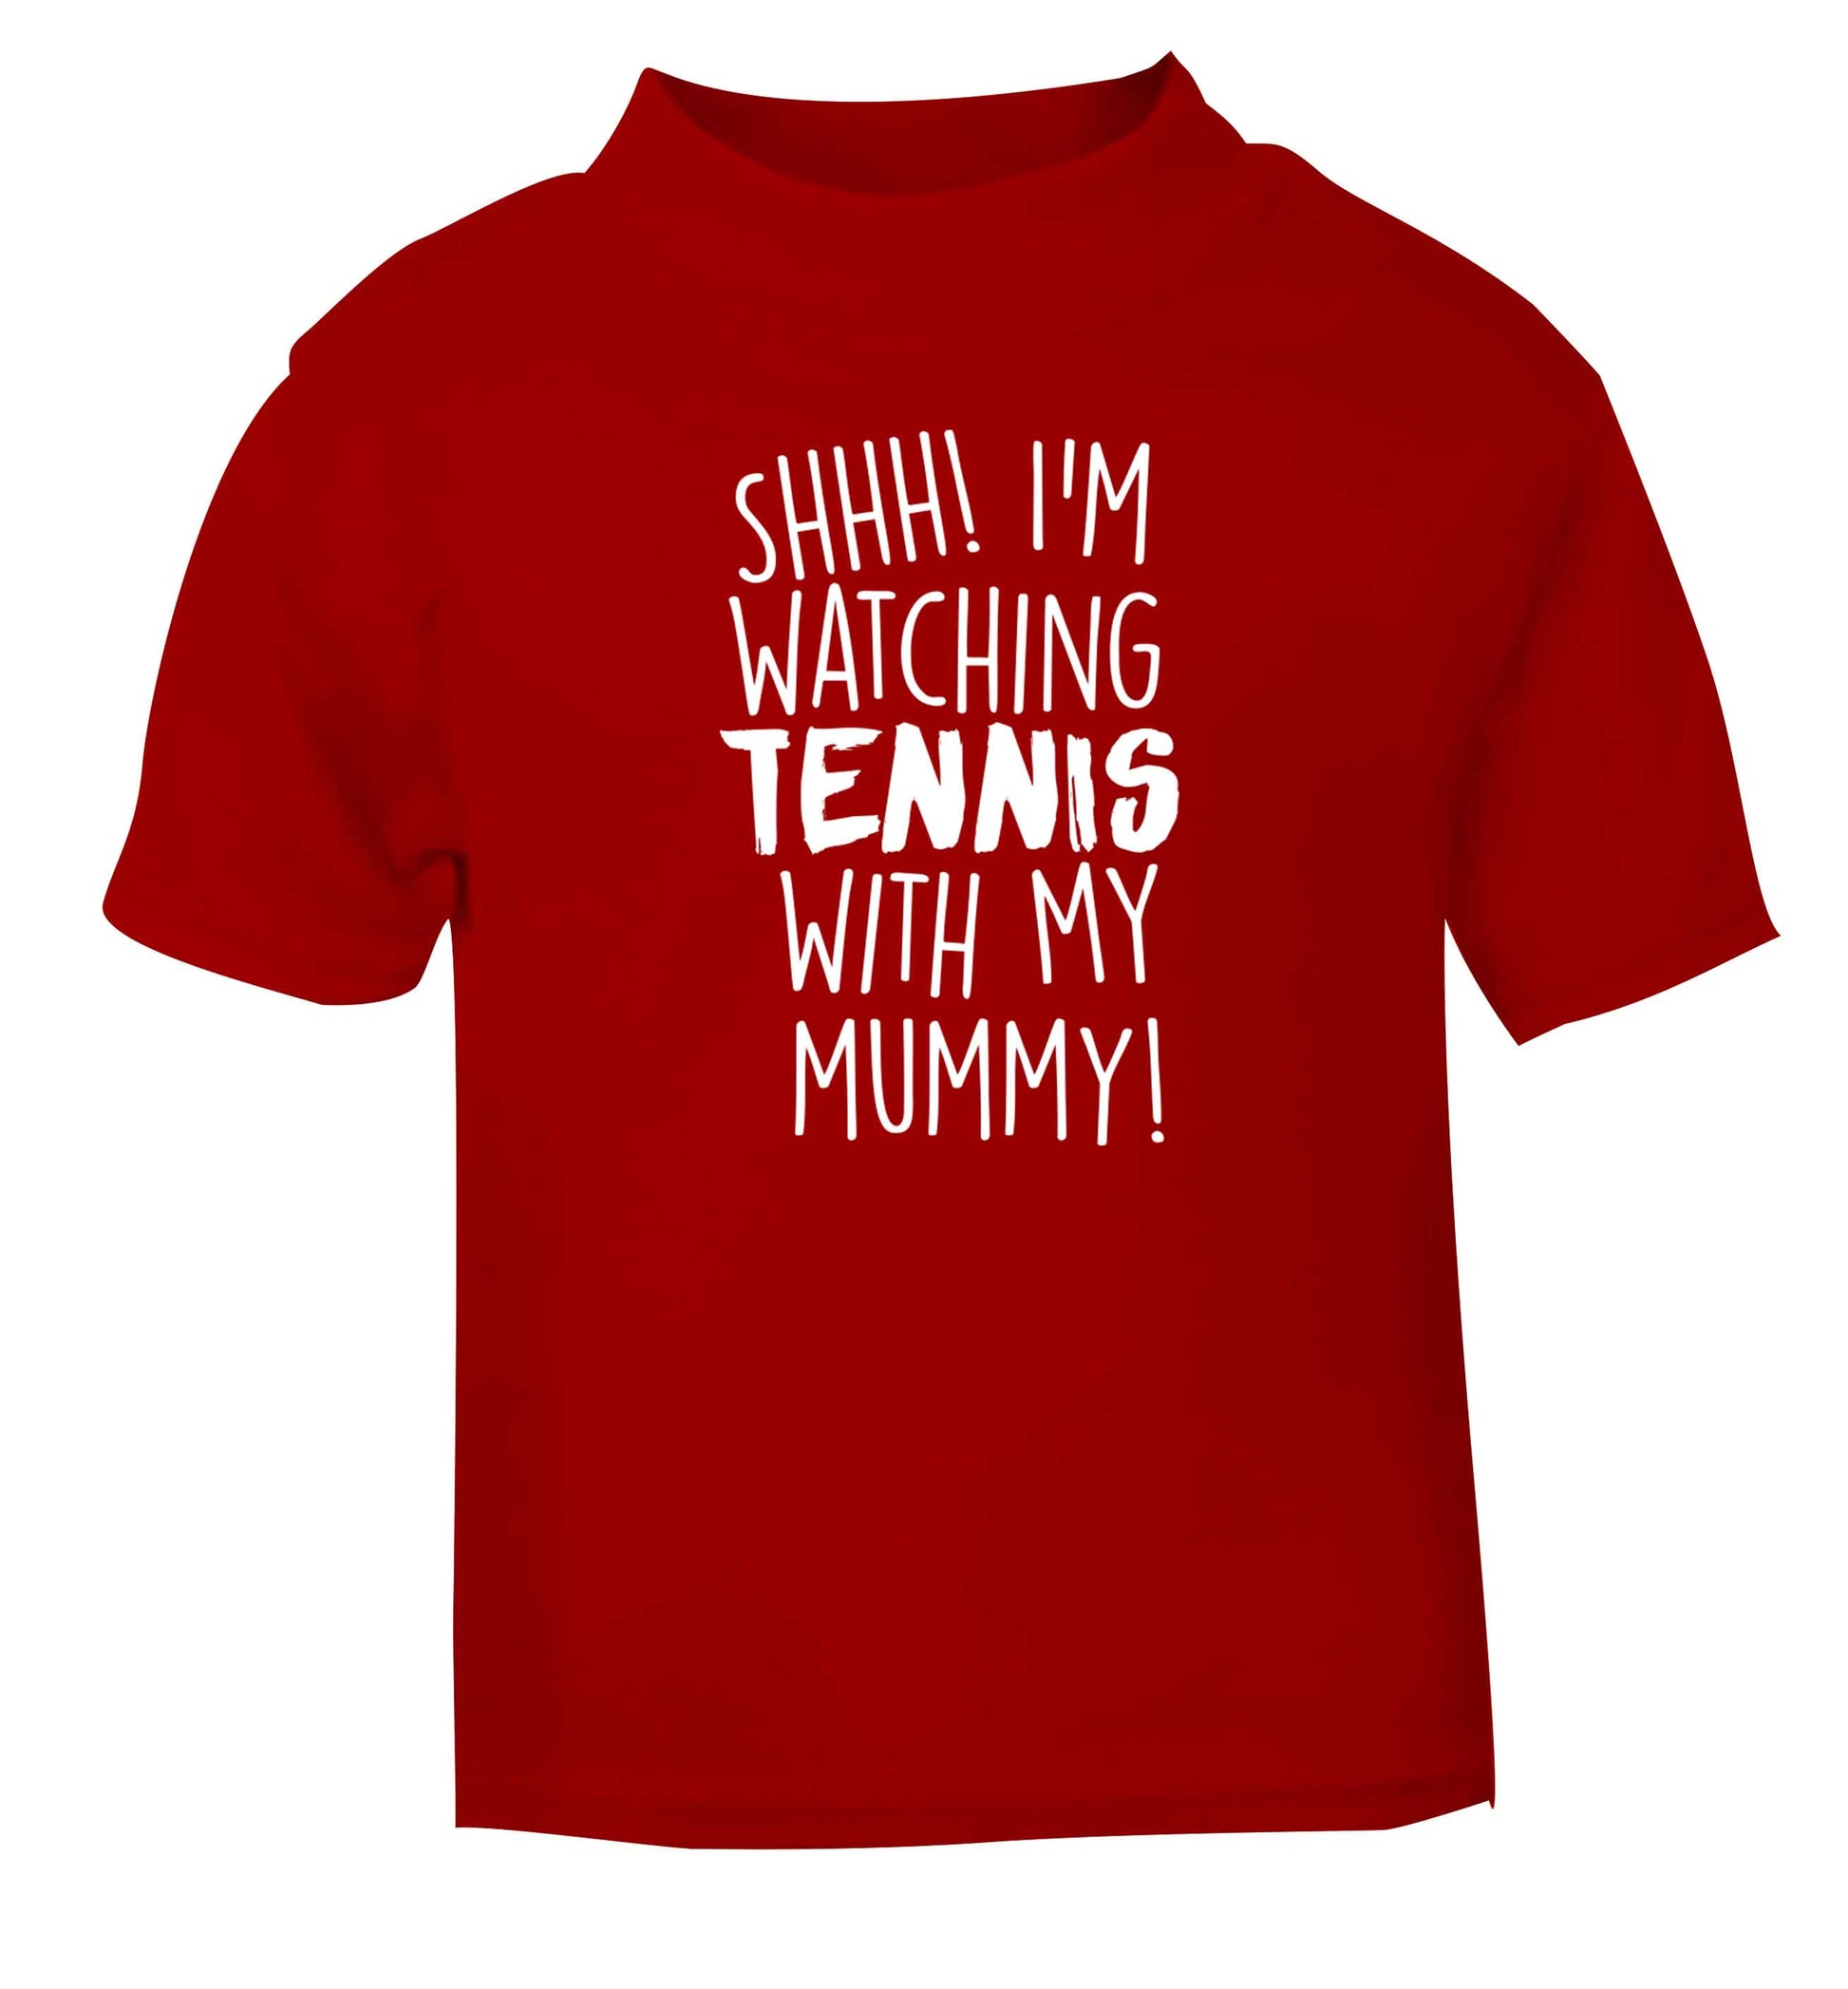 Shh! I'm watching tennis with my mummy! red Baby Toddler Tshirt 2 Years